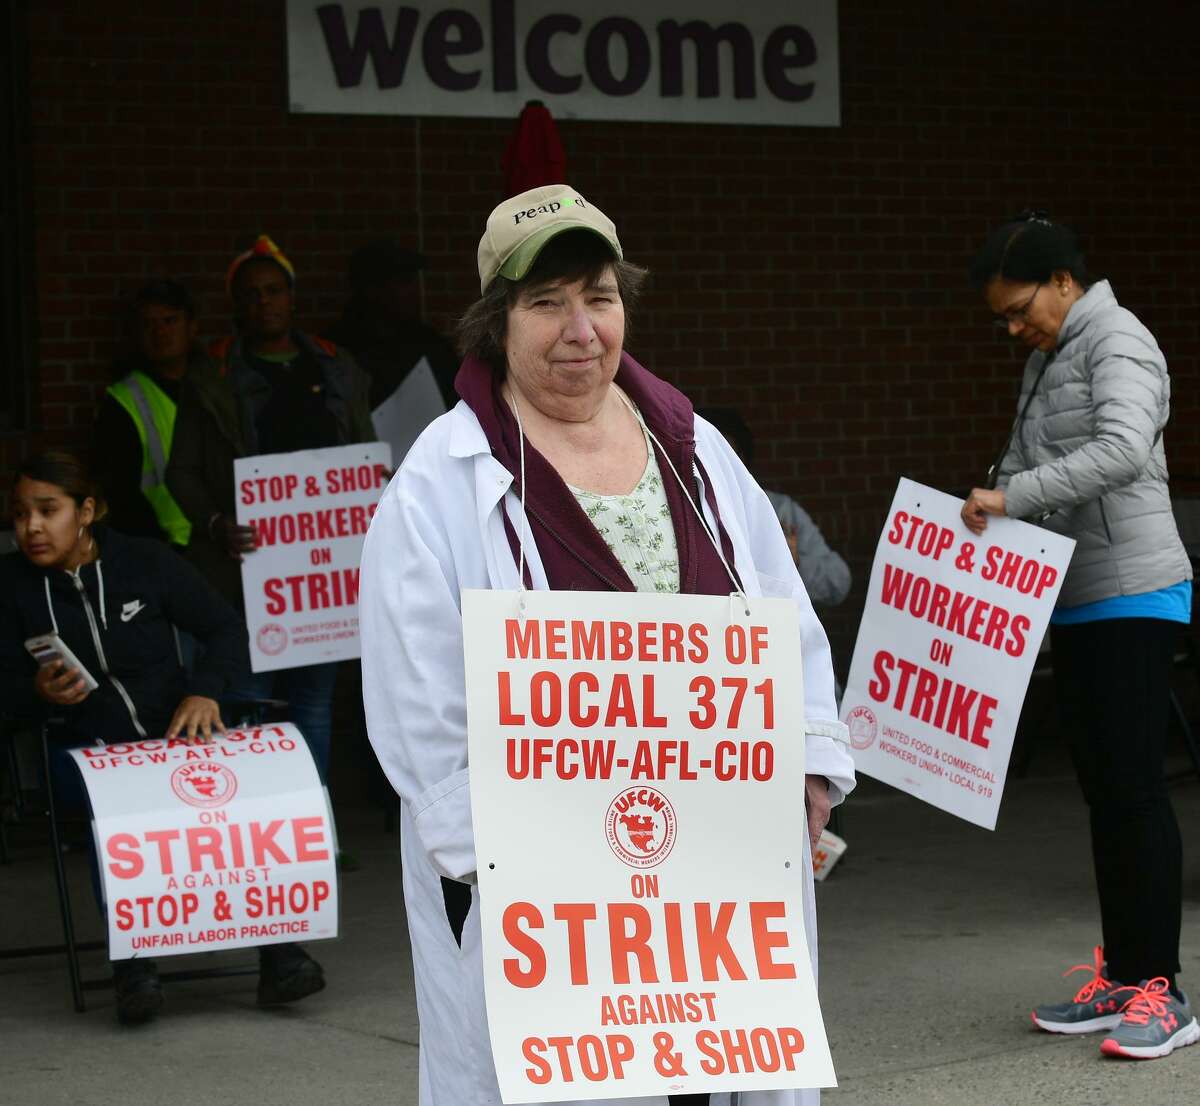 Workers with the UFCW-AFL-CIO Local 371 including Jean Federici strike Thursday, April 11, 2019, at the Stop & Shop on Main Avenue in Norwalk, Conn.